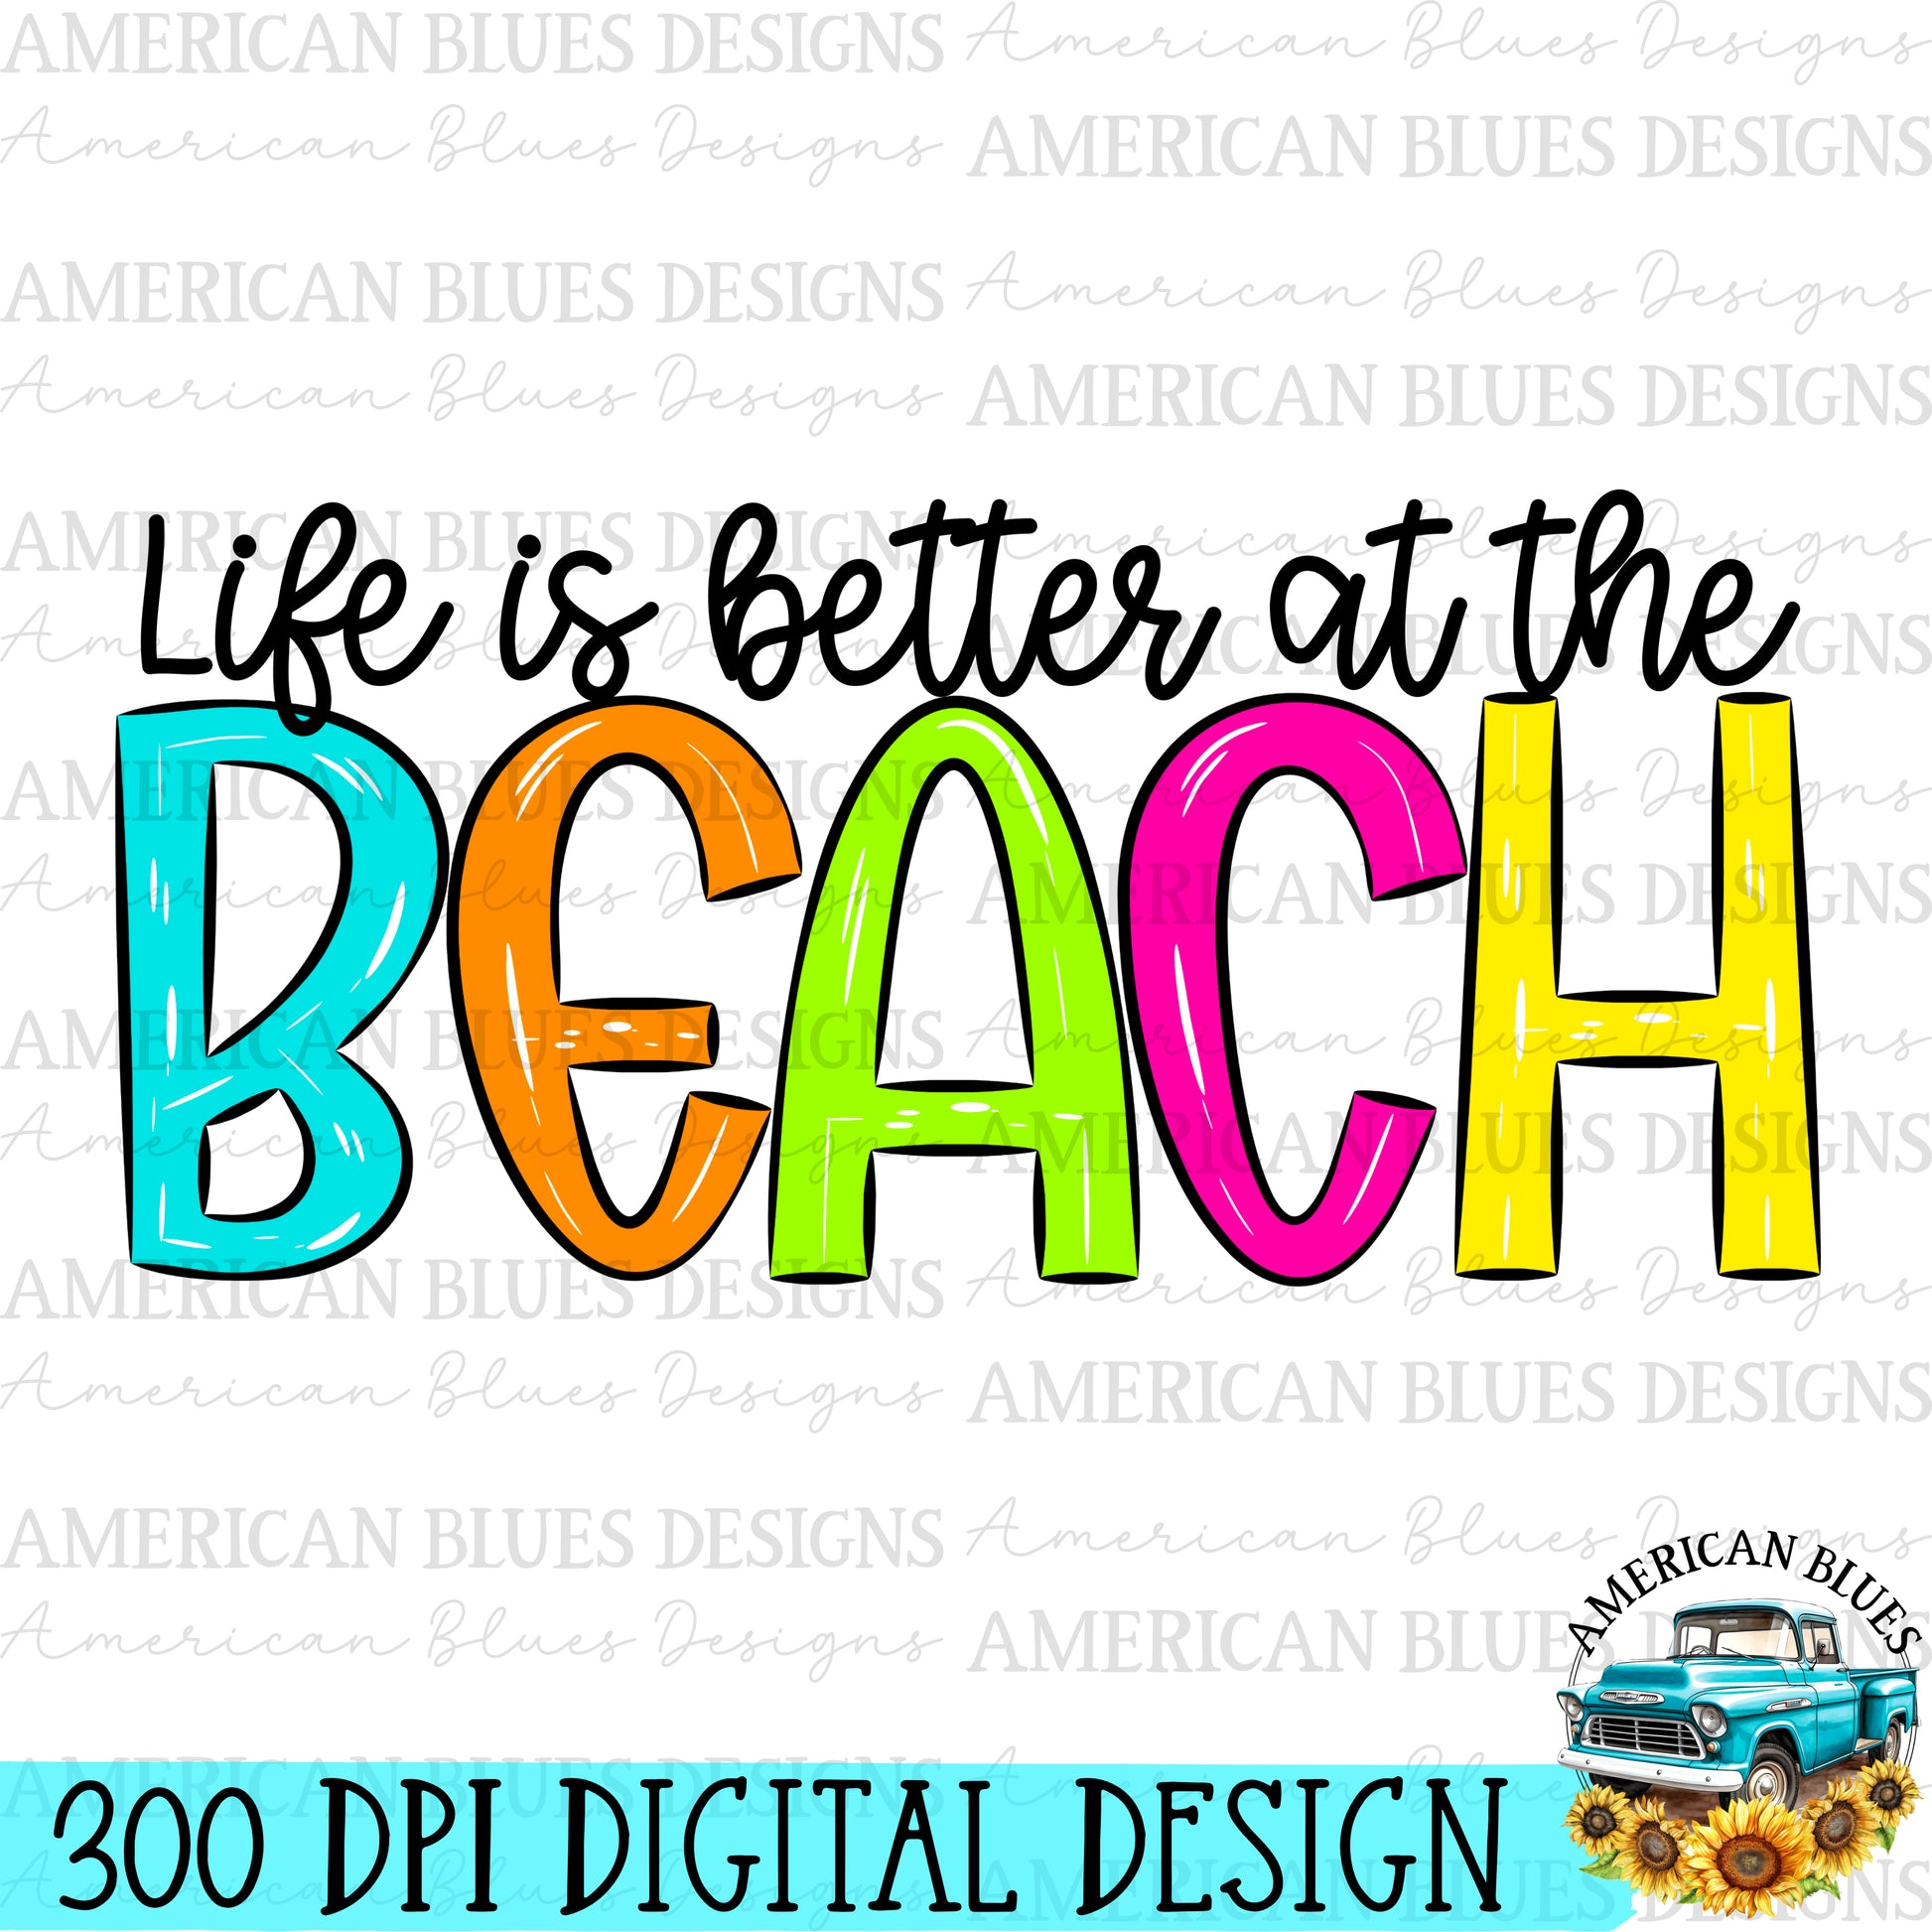  Life is better at the beach digital design | American Blues Designs